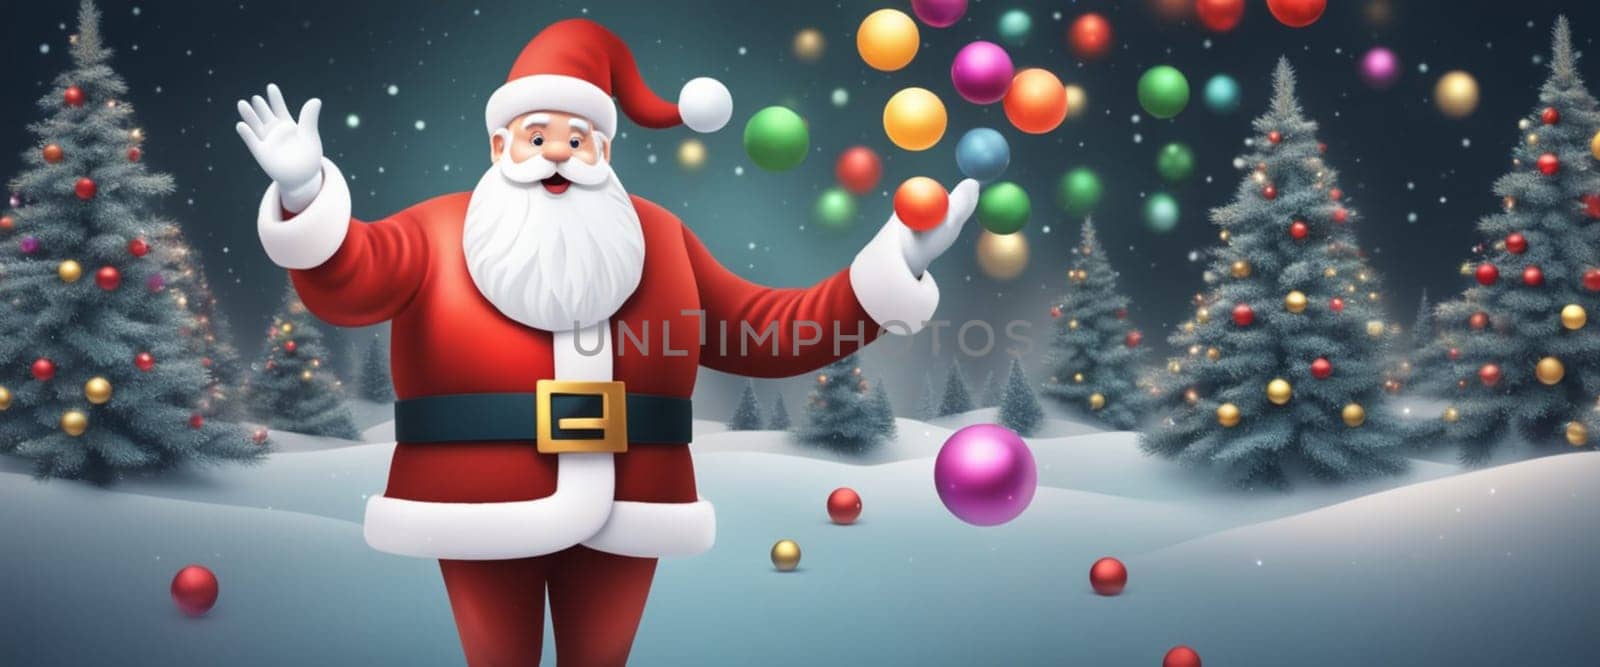 Santa Claus play and juggle with Christmas time ornaments outdoors in the snow at sunset by verbano